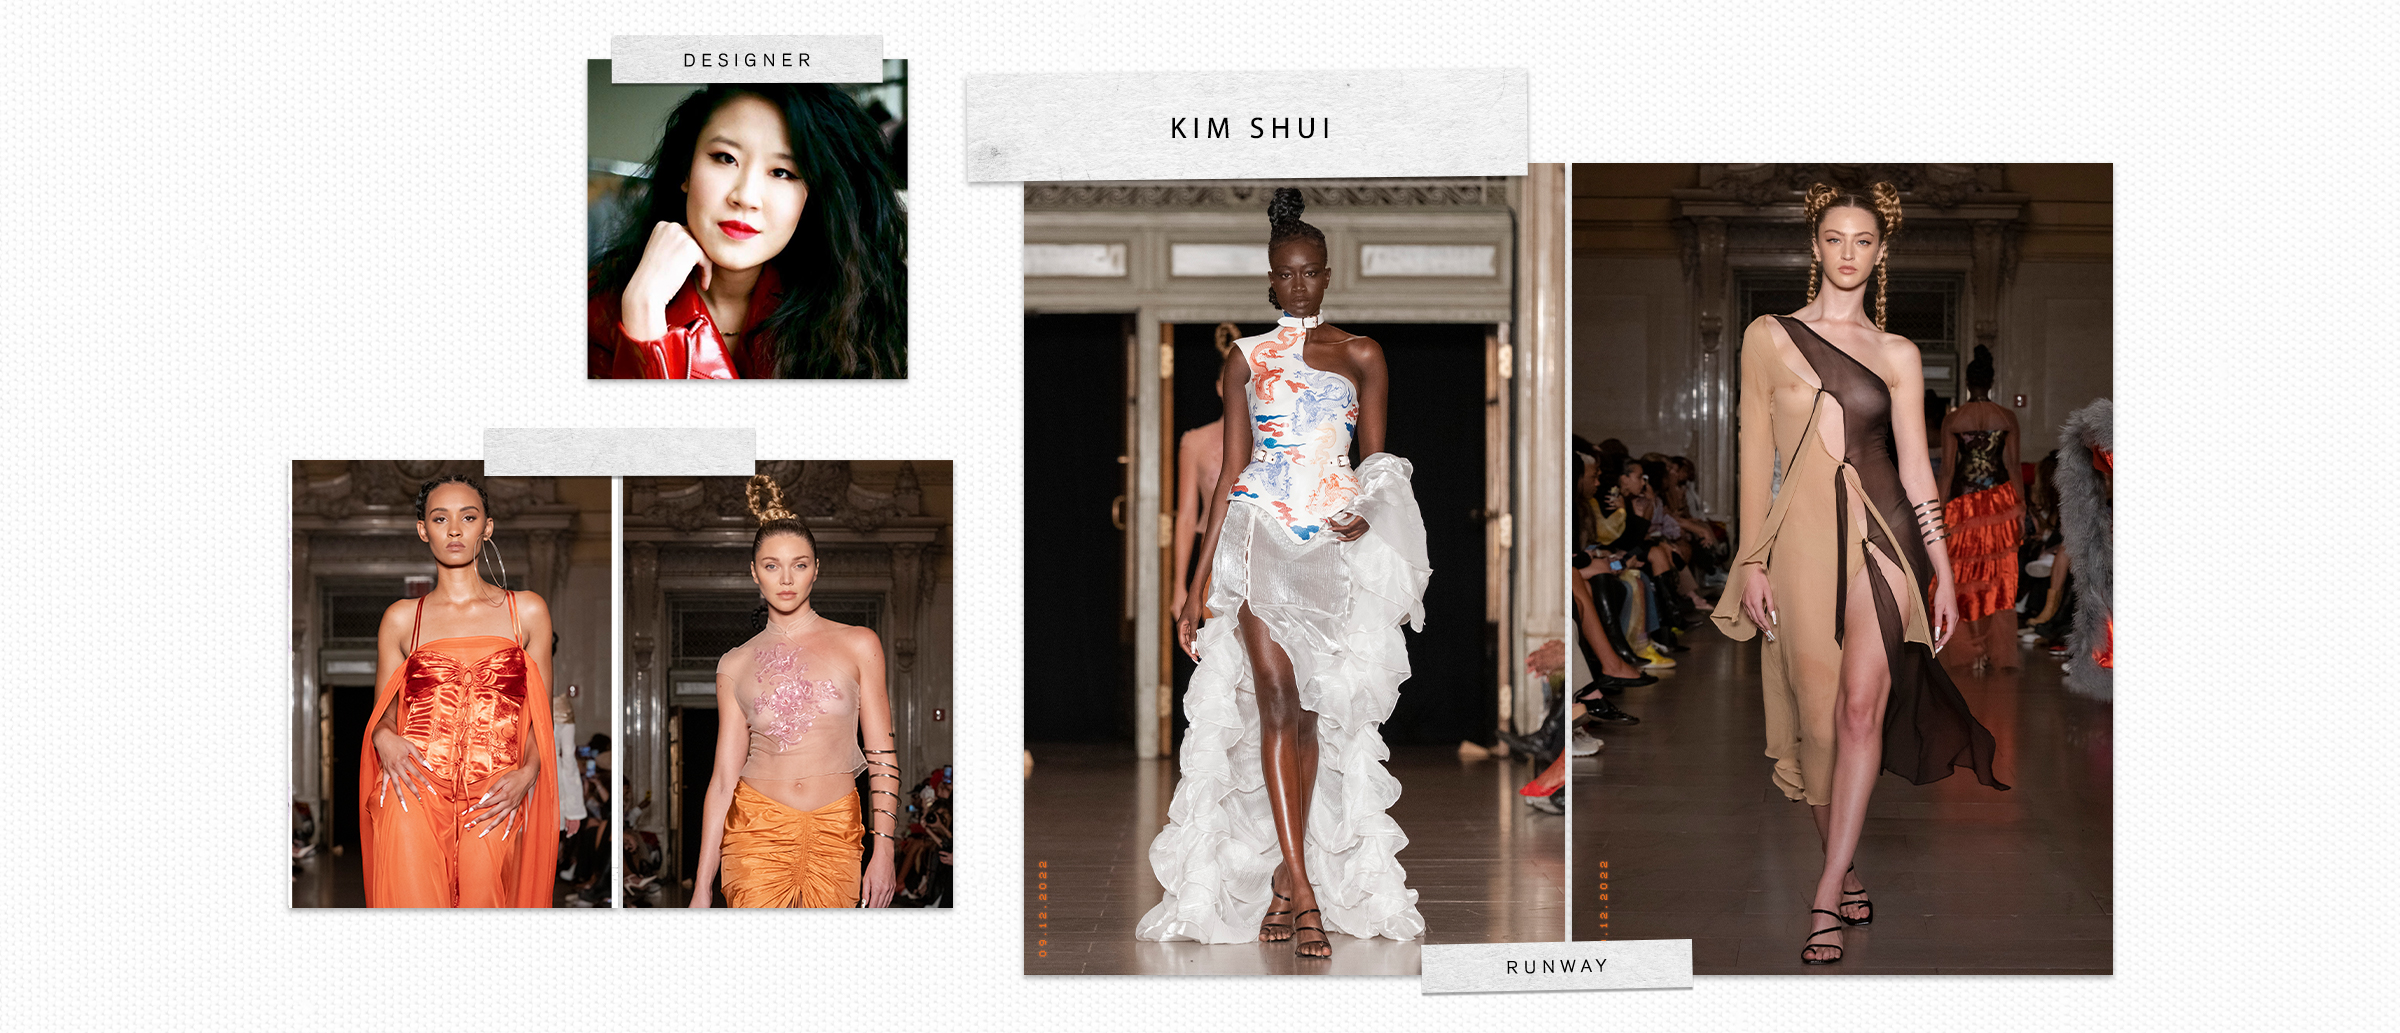 Fashion designer Kim Shui, and her most recent spring/summer 2023 collection